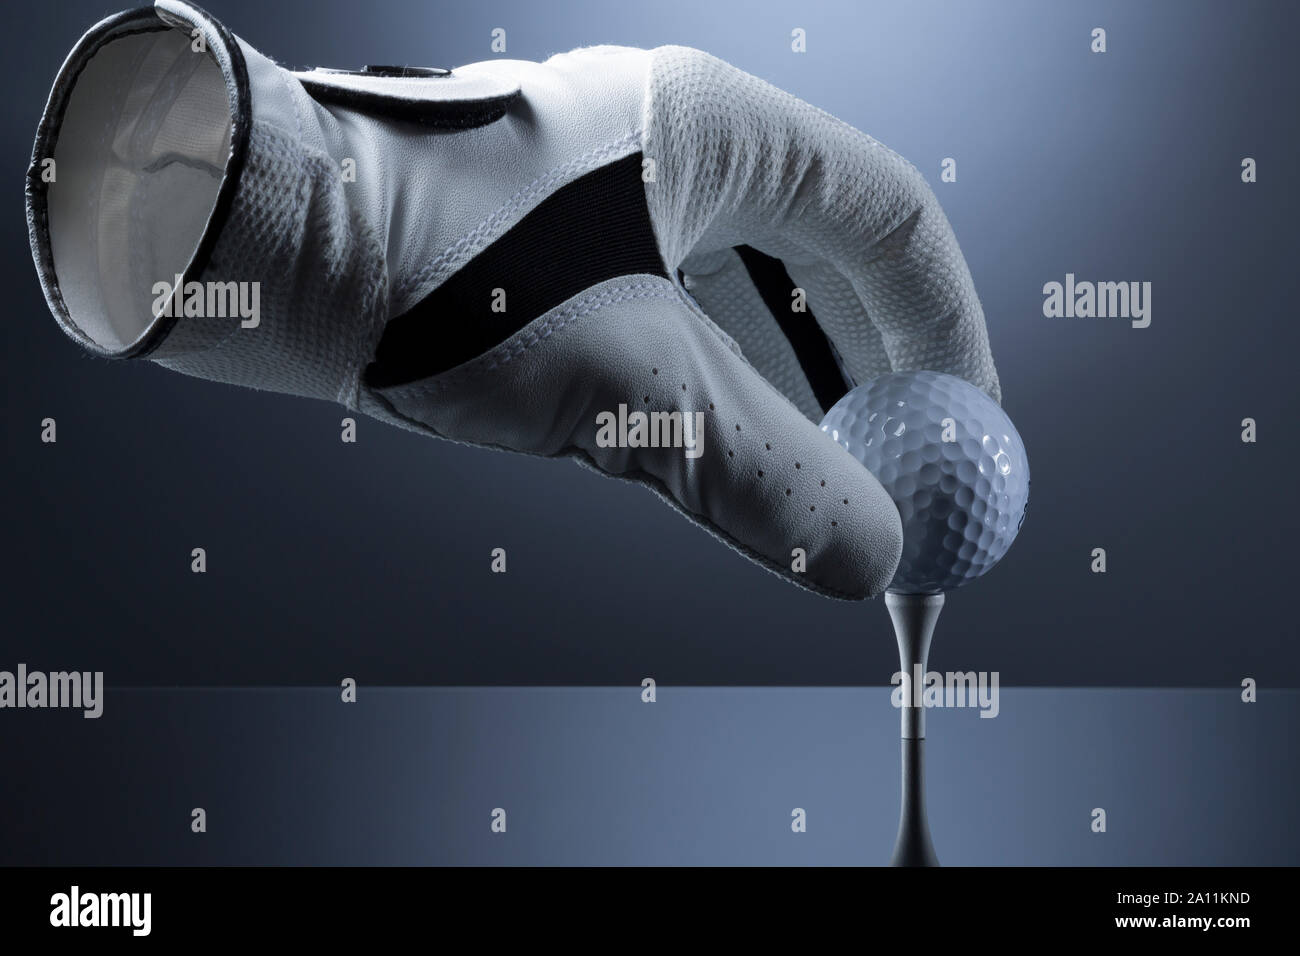 Close up of empty golf glove putting a golf ball on tee. Stock Photo